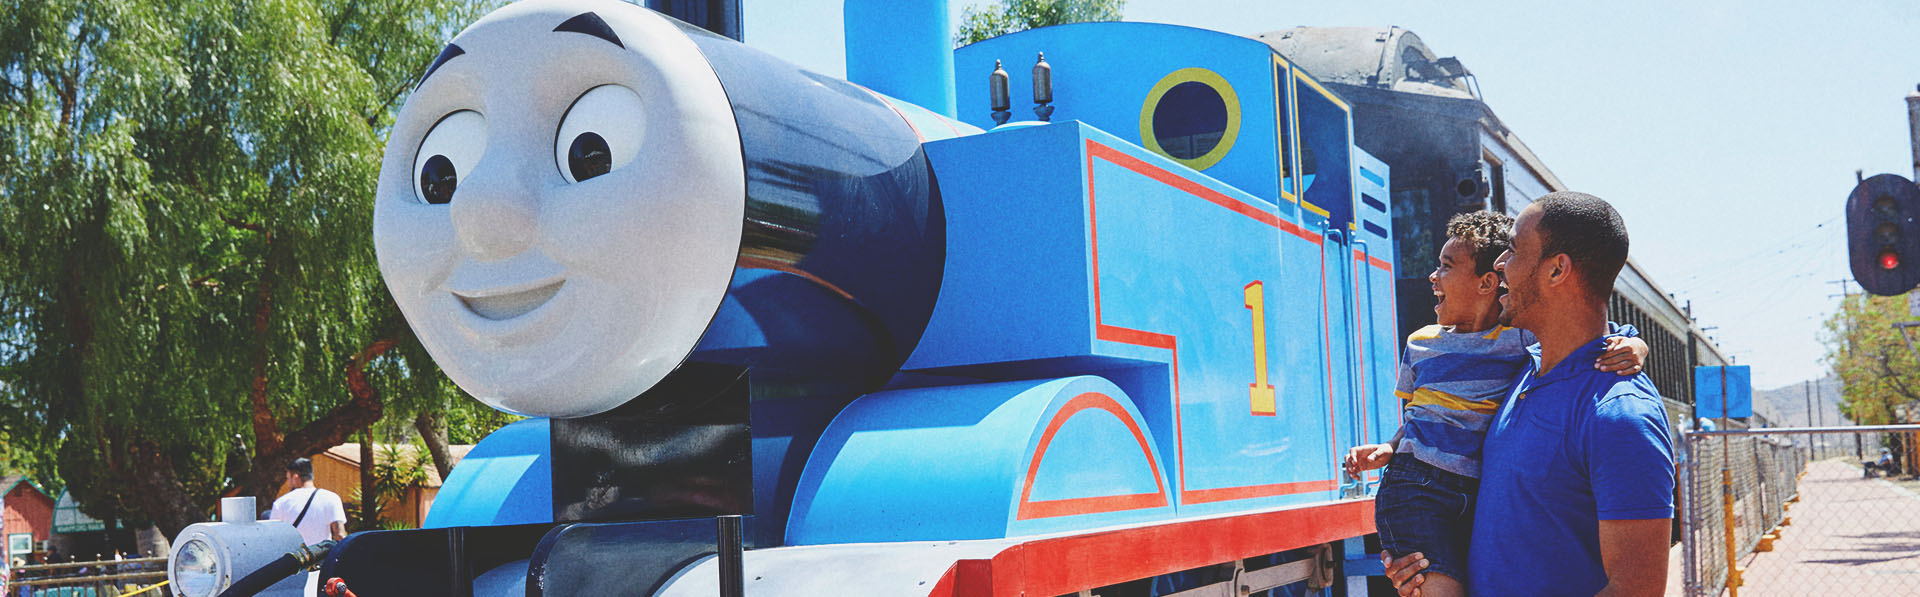 father & son posing with Thomas the Engine at Heritage Park